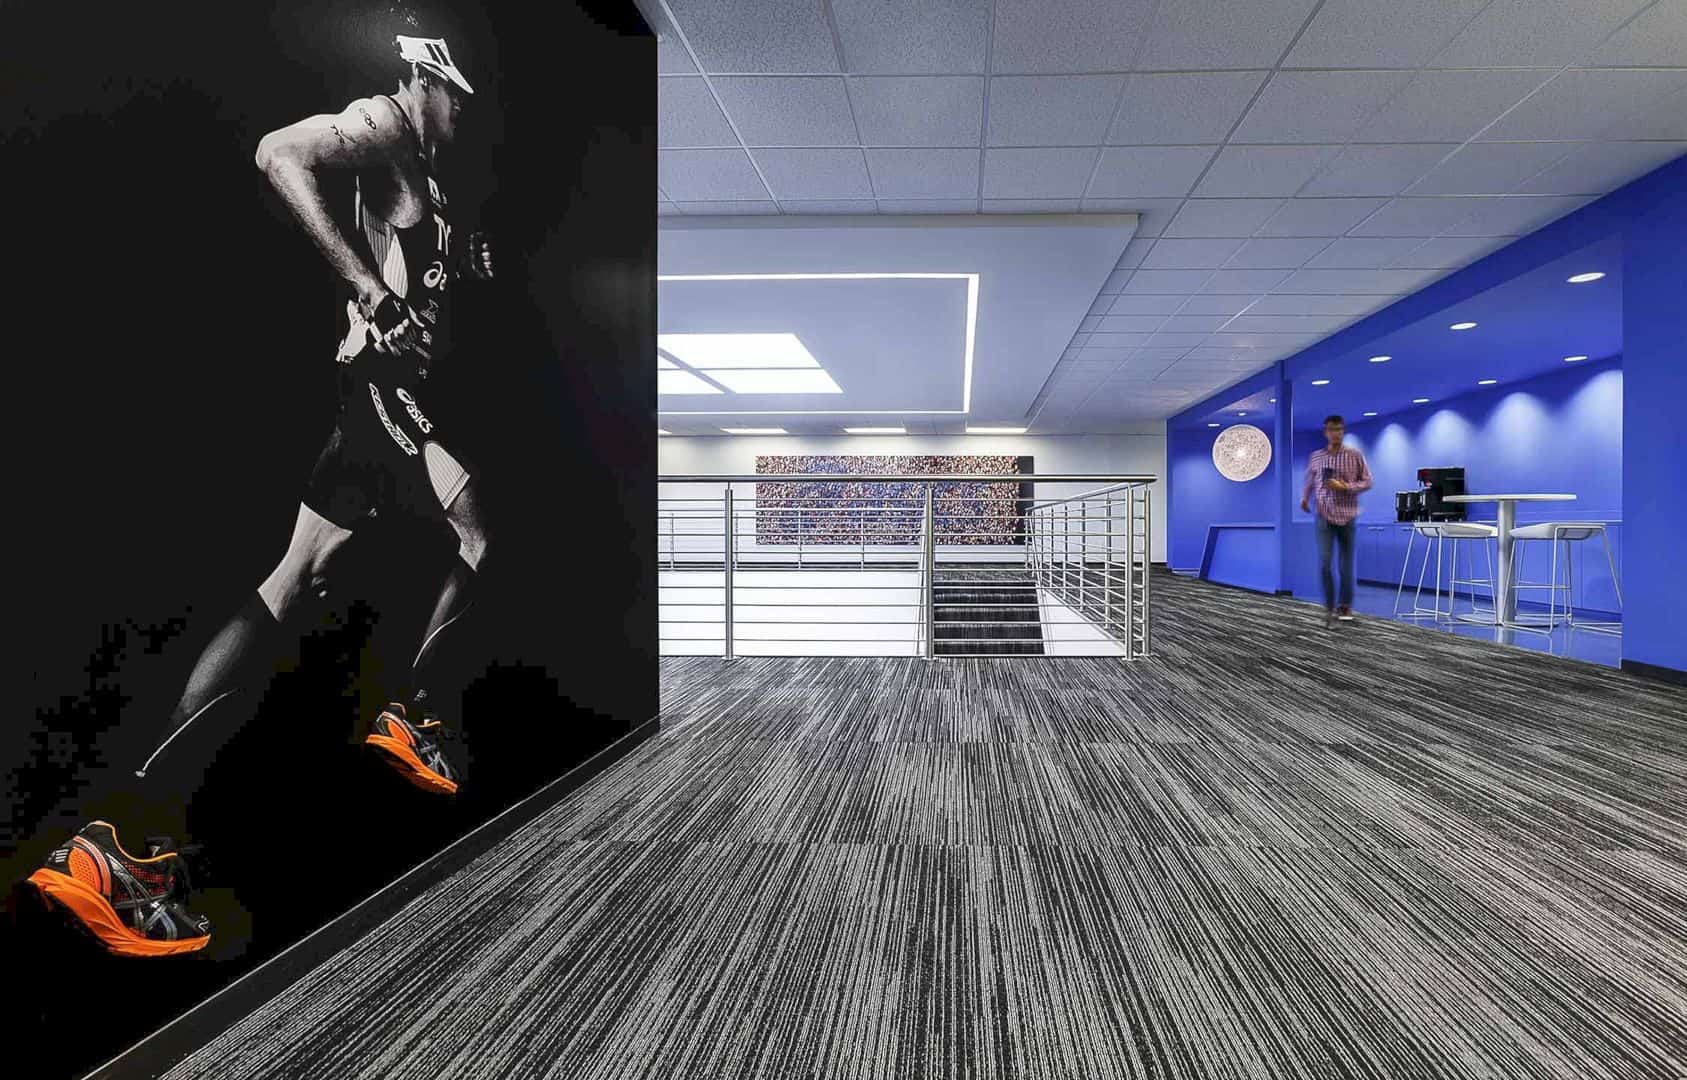 Asics North America Headquarters An Office Environment With Health Fitness And Wellness Advantages 1